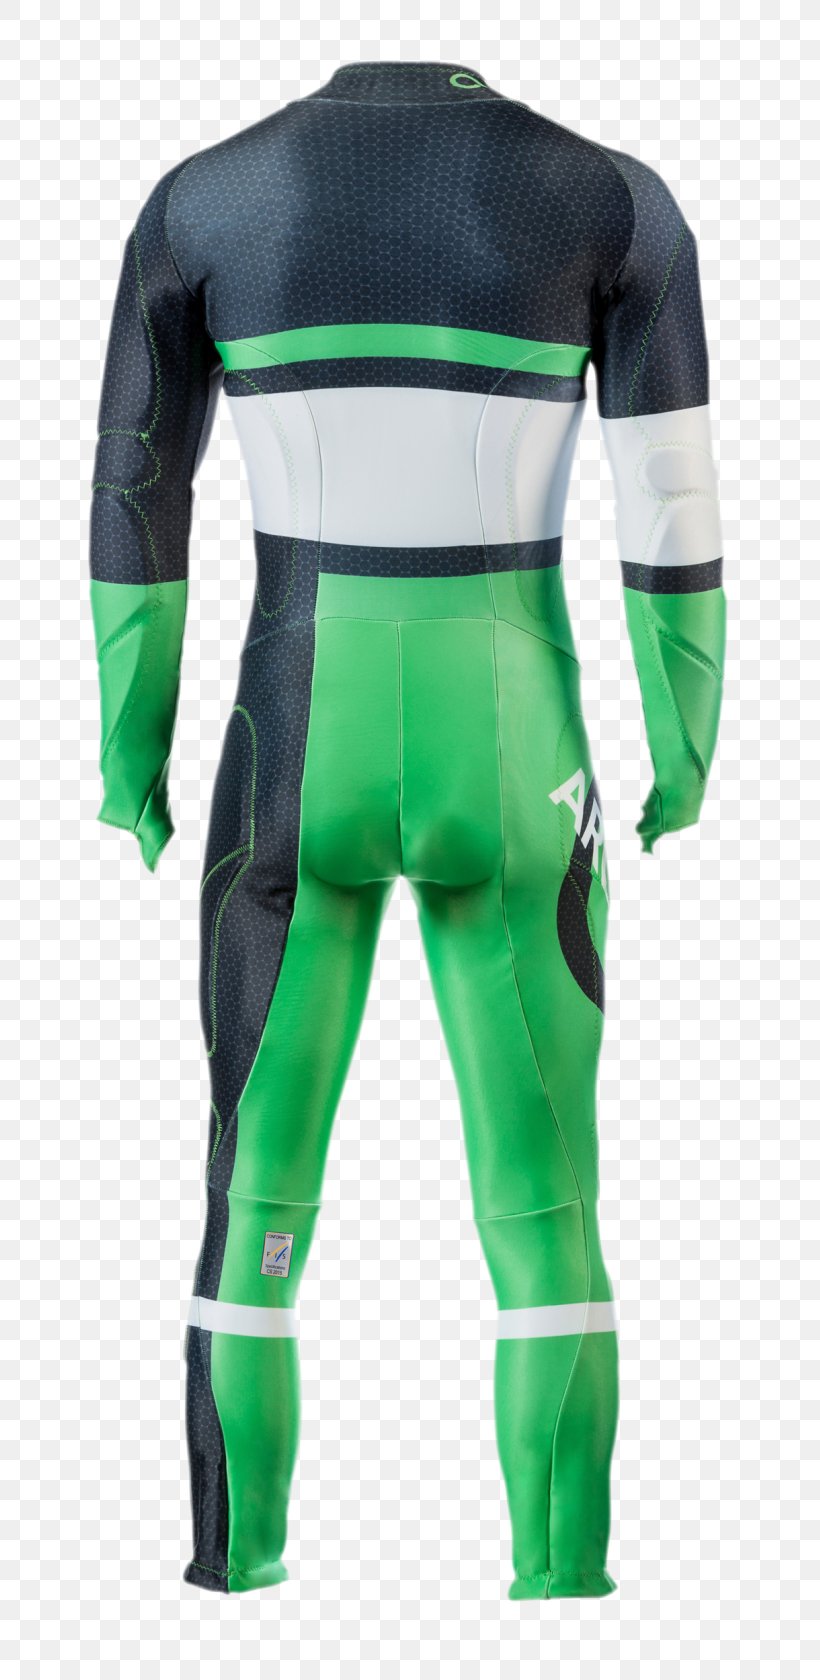 Wetsuit Dry Suit Spandex Textile, PNG, 773x1680px, Wetsuit, Dry Suit, Green, Personal Protective Equipment, Sleeve Download Free